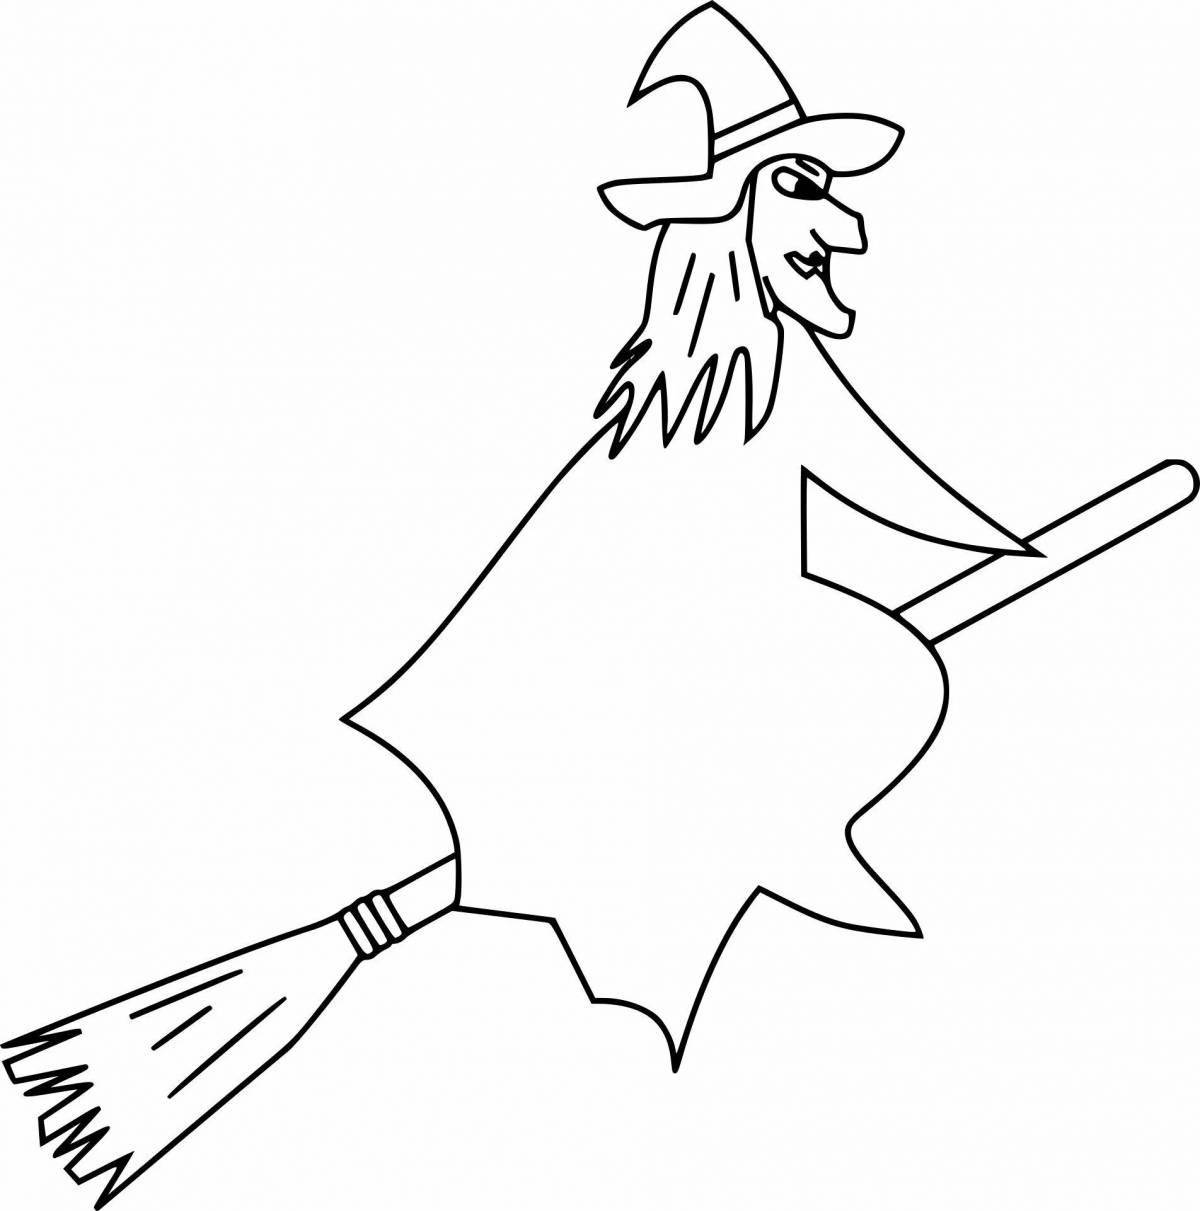 Witch tempting coloring book